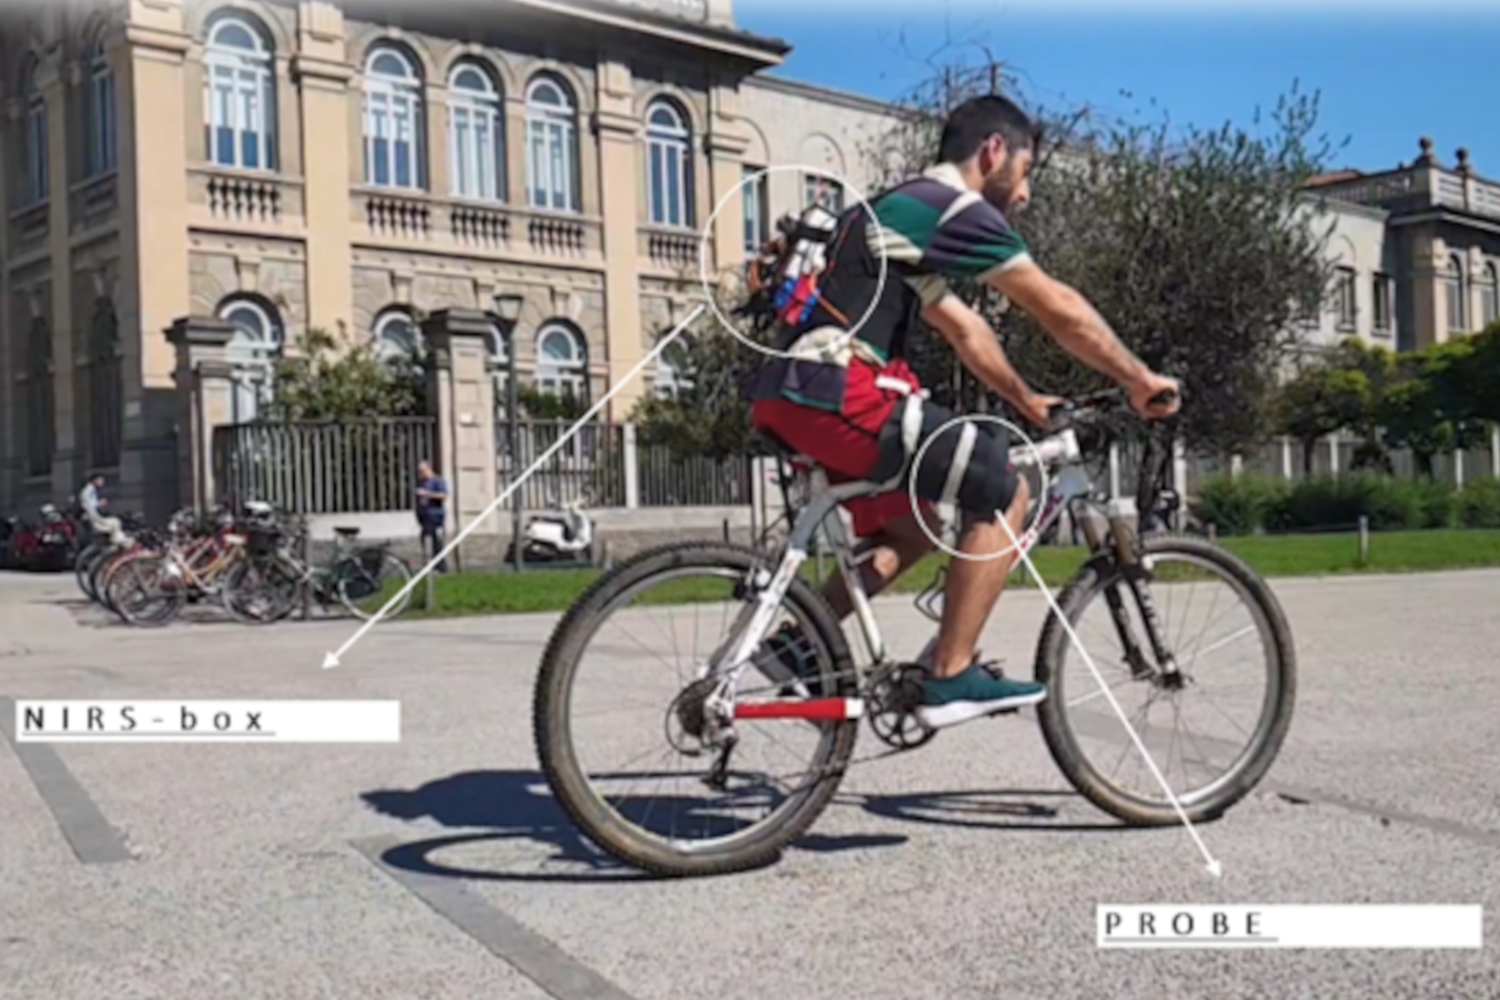 Through the development of our portable TD-NIRS device, we made a lot of challenging tests. Here is a bike riding exercise, with an early prototype of the NIRSBOX as a backpack, in a hot and sunny day in Milano.